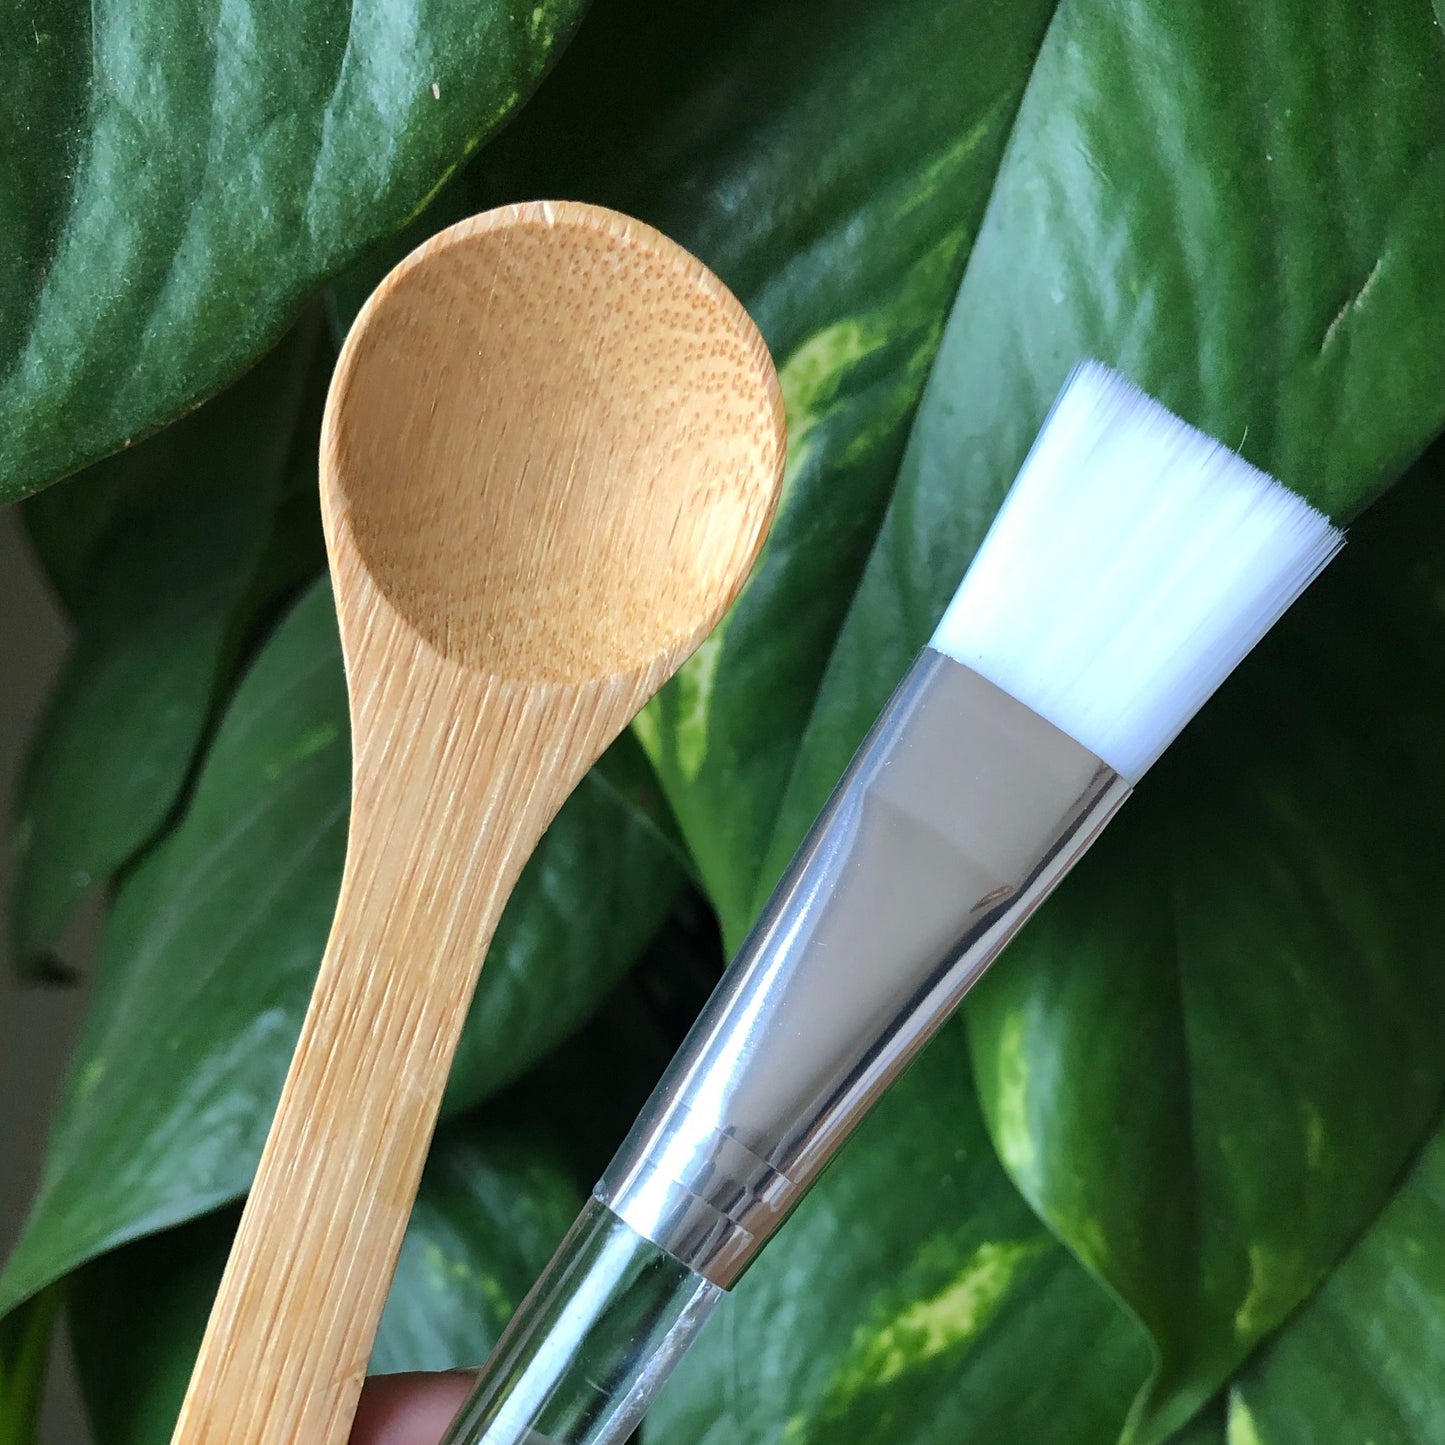 clay face mask applicator brush and spoon